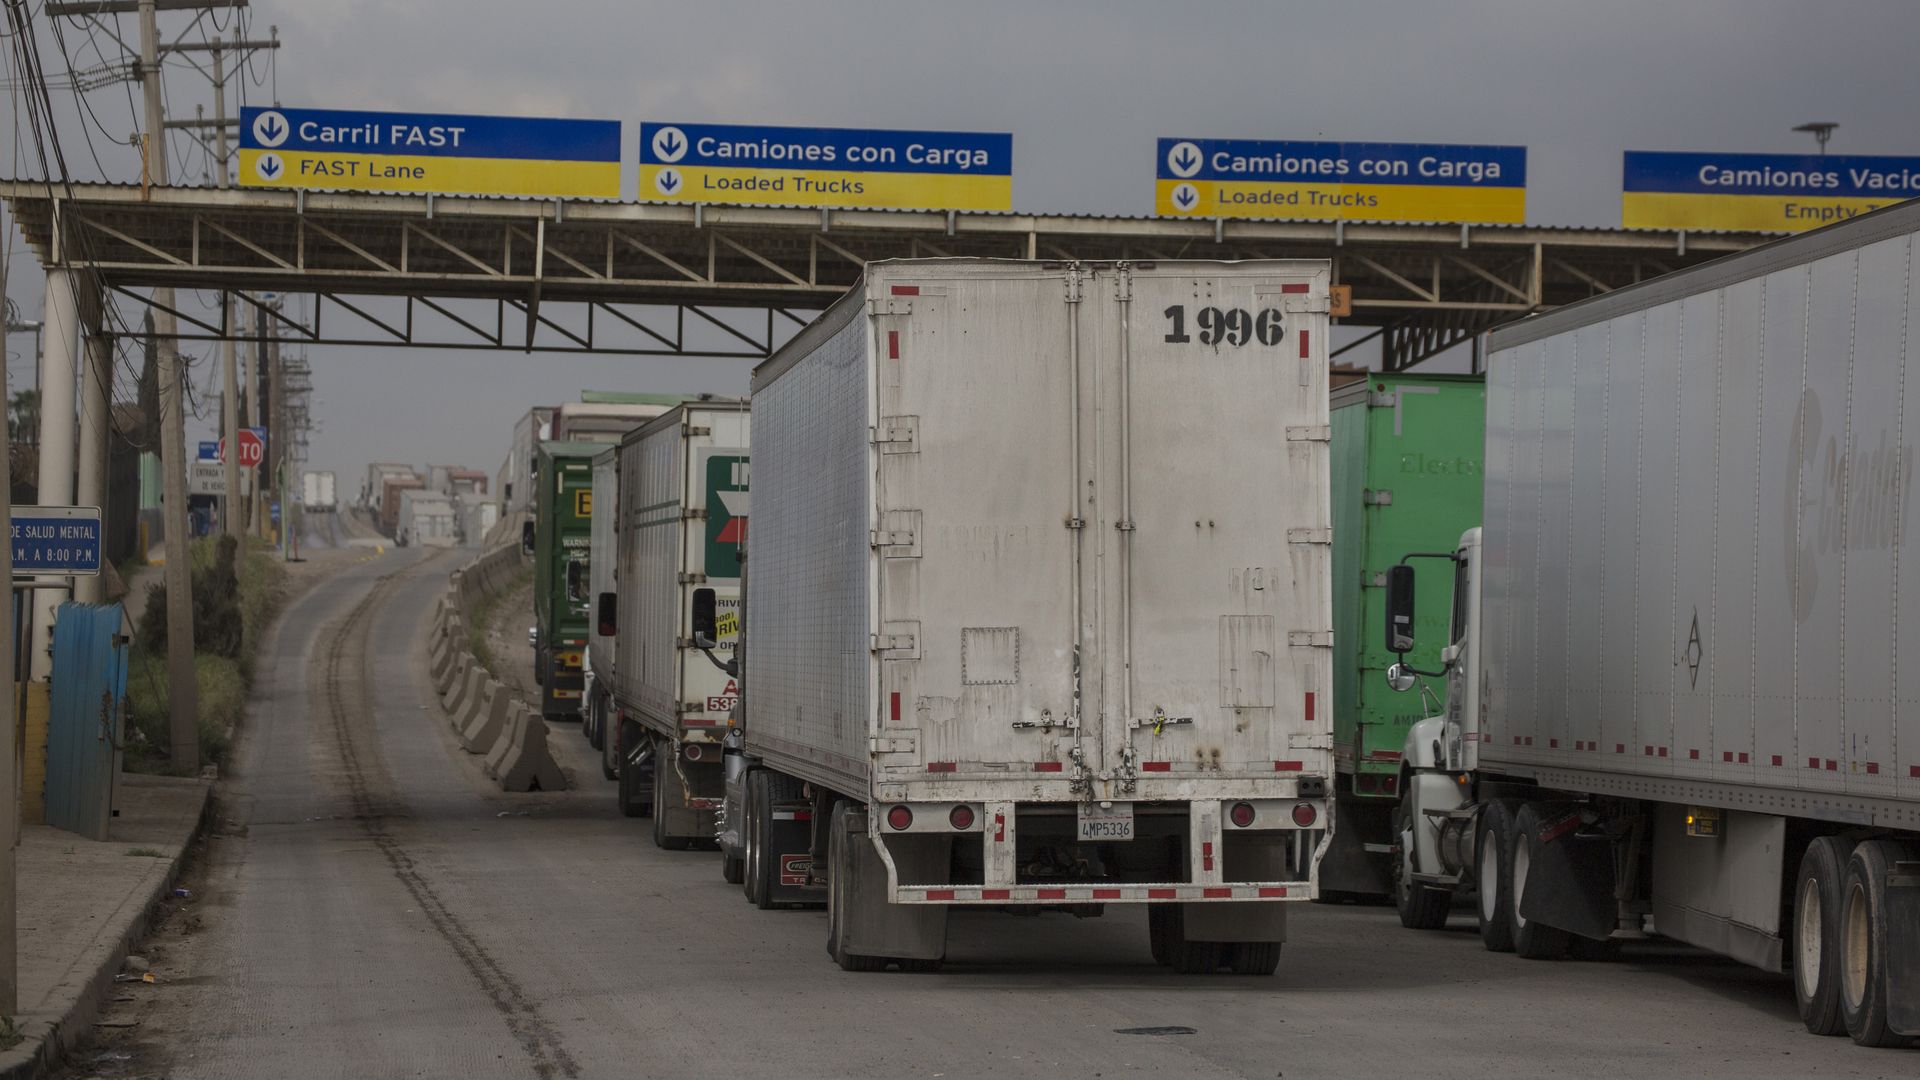 Long queues of trucks on the border between Mexico and the USA